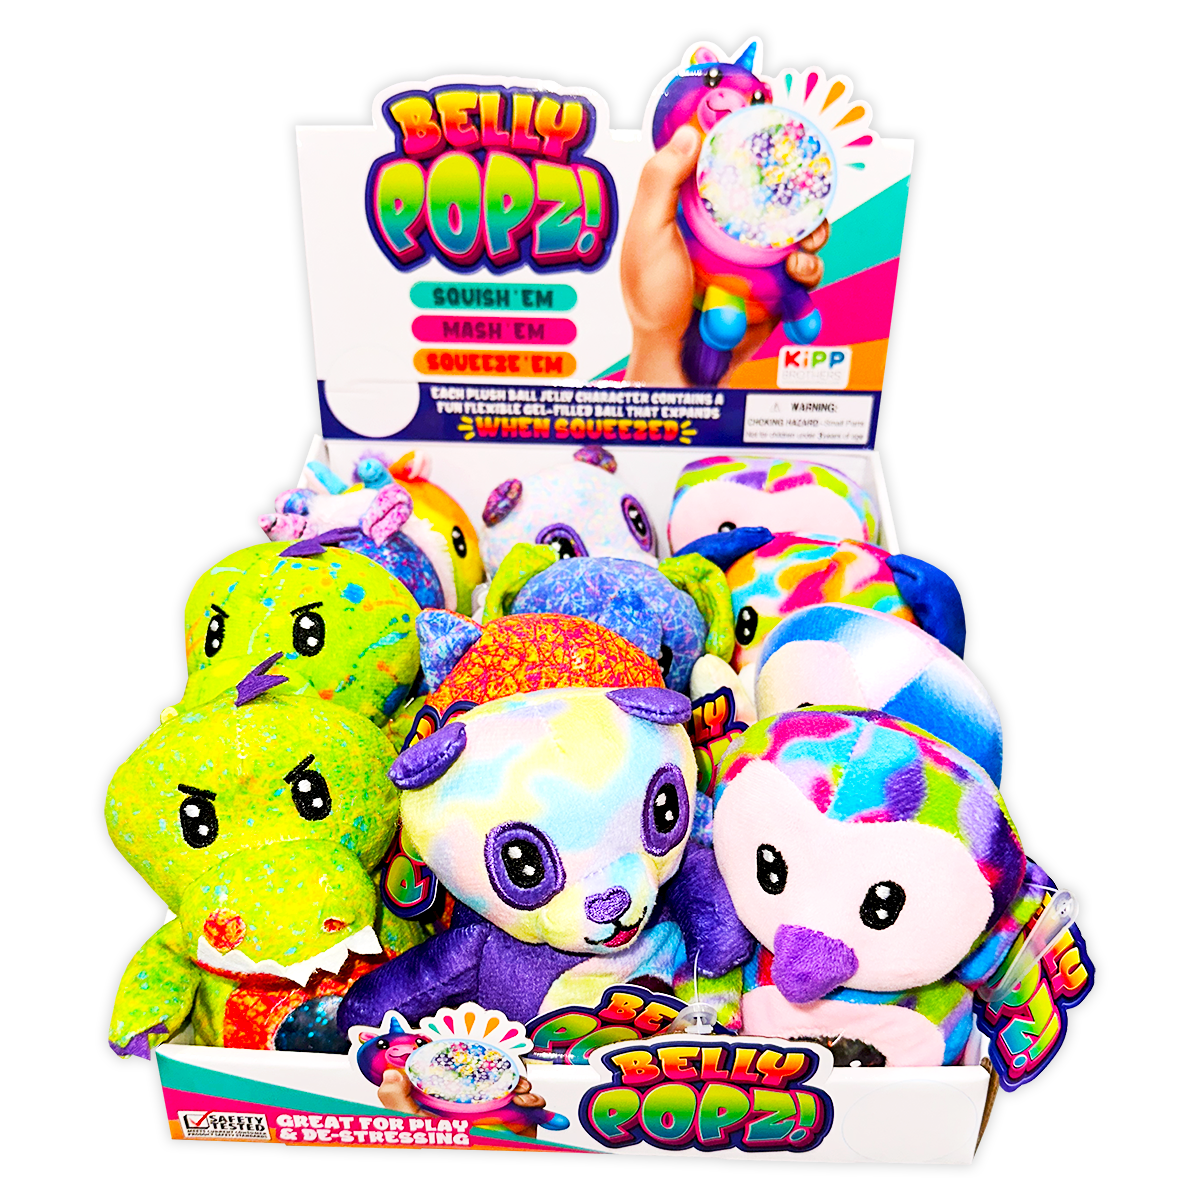 ITEM NUMBER 023752 BELLY POPZ PLUSH TOY 12 PIECES PER DISPLAY